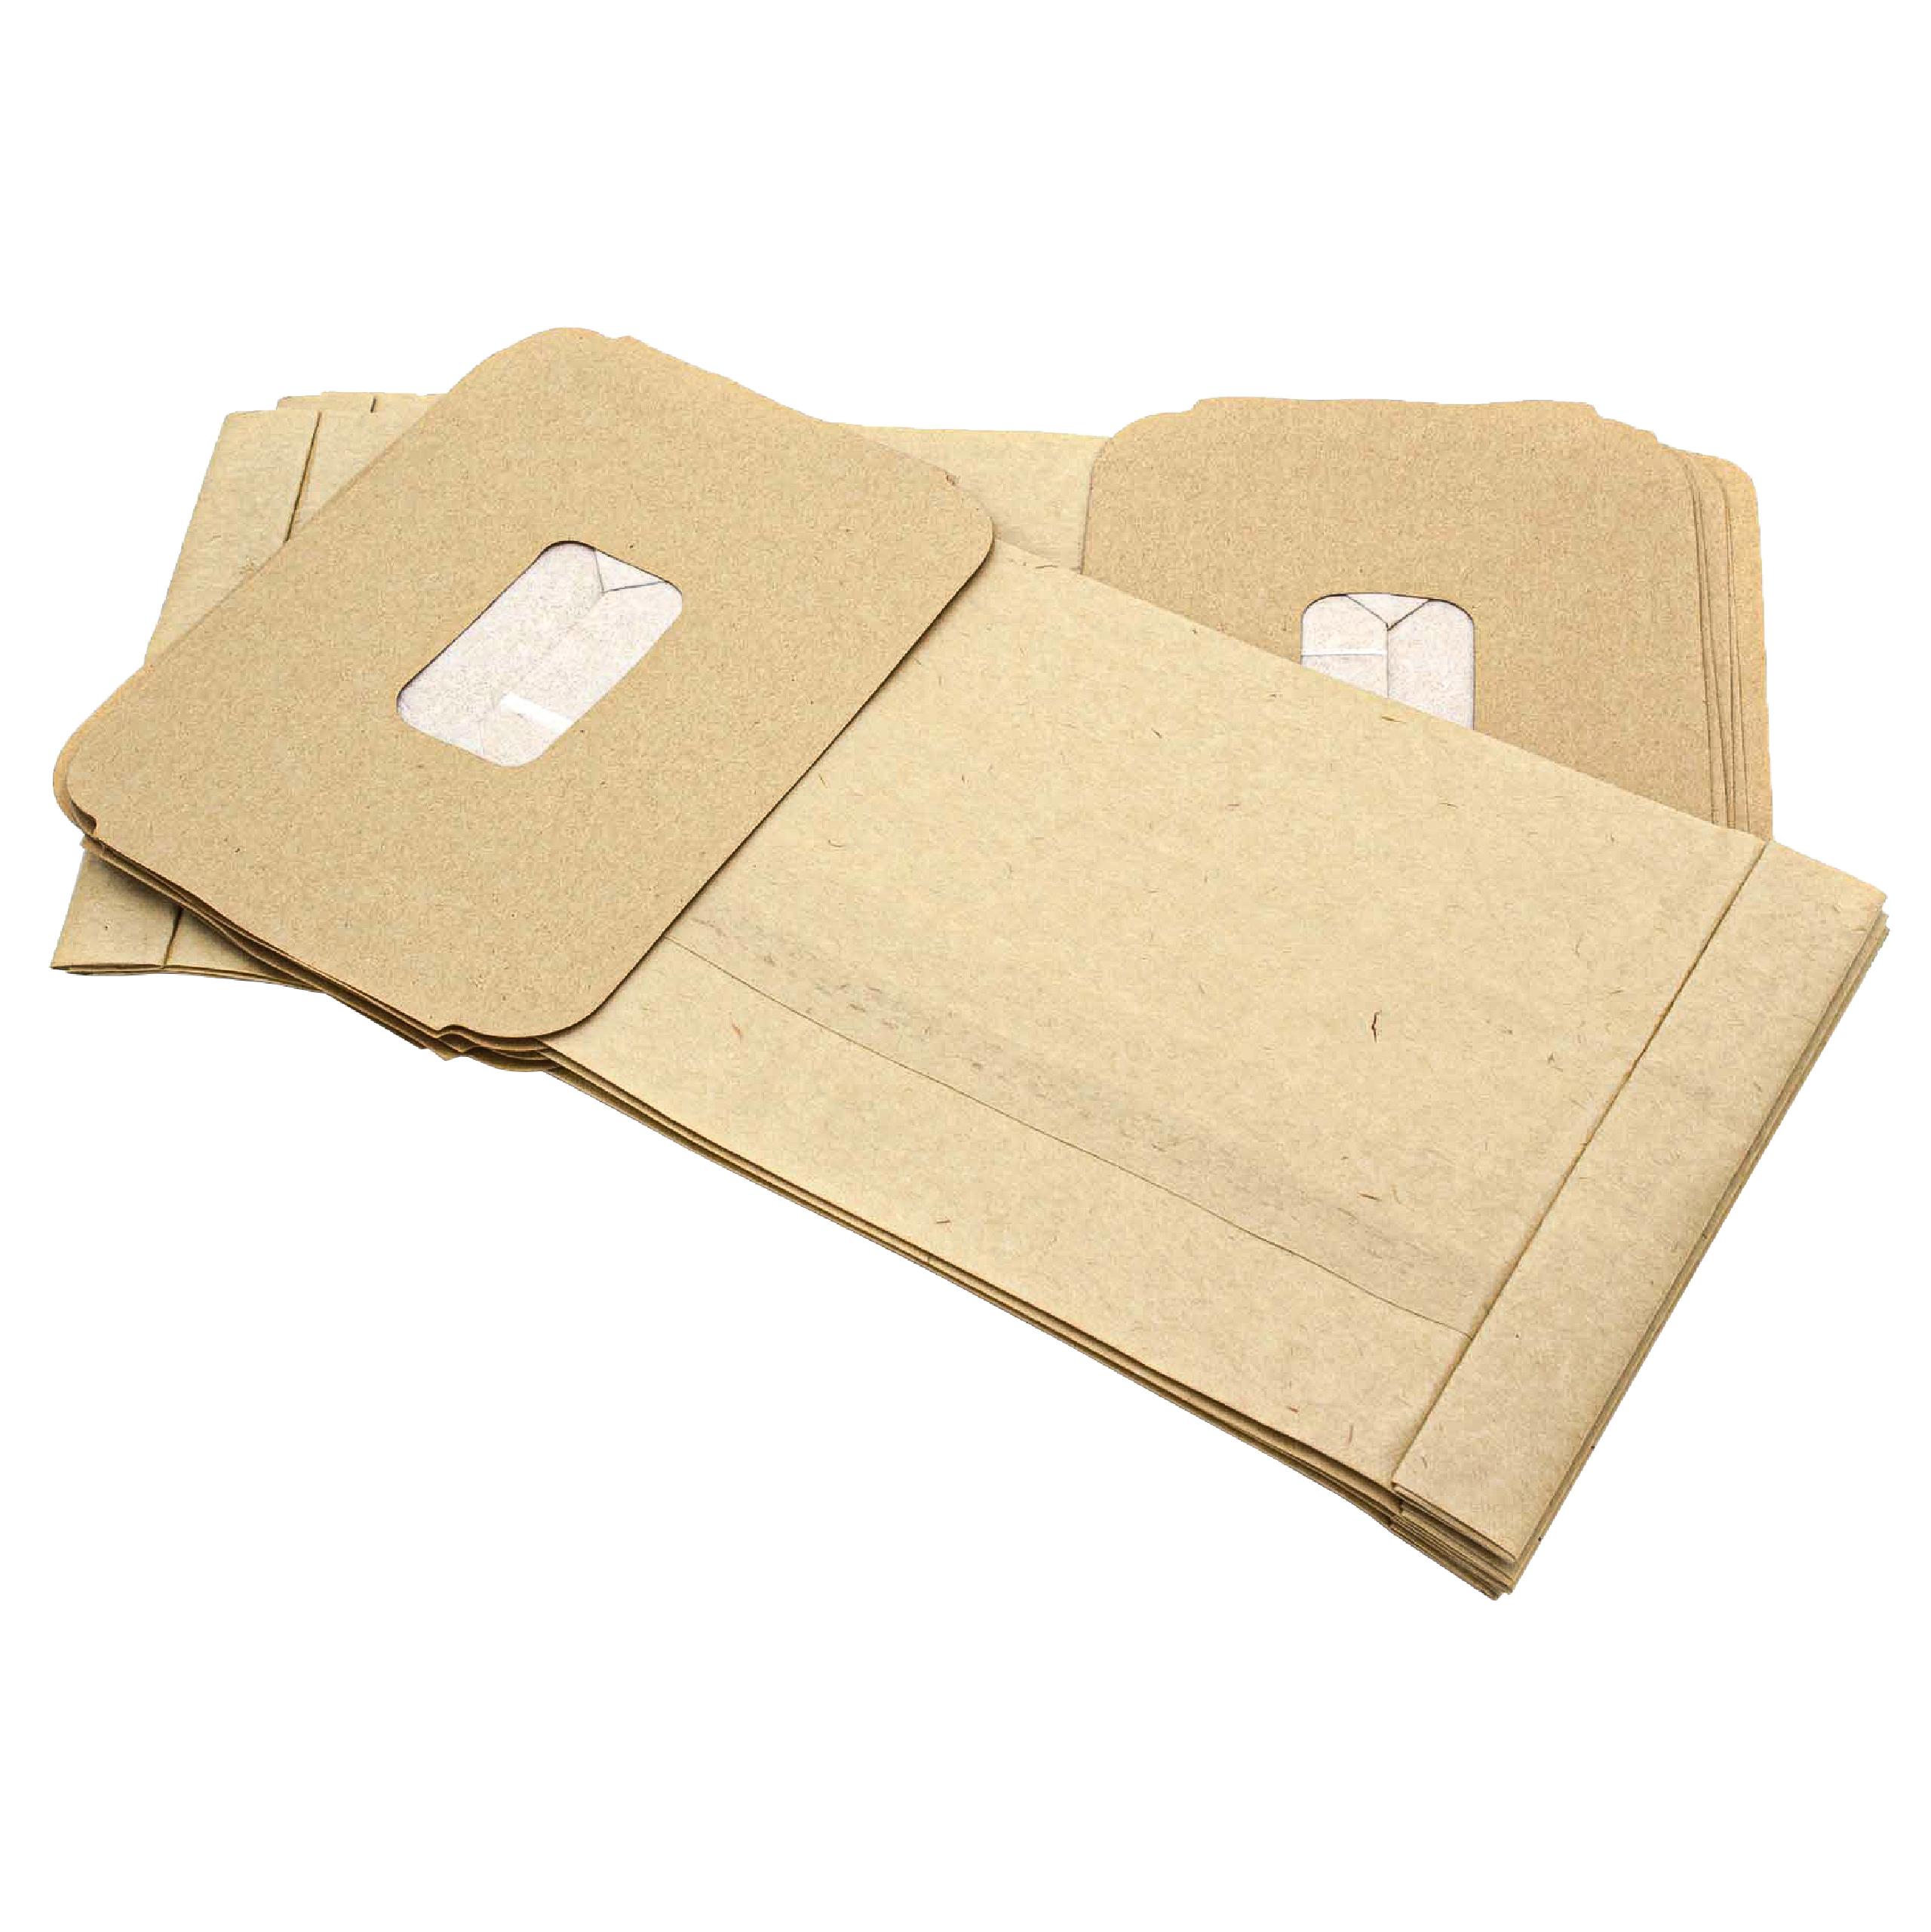 10x Vacuum Cleaner Bag replaces Europlus PH 1201 for Philips - paper